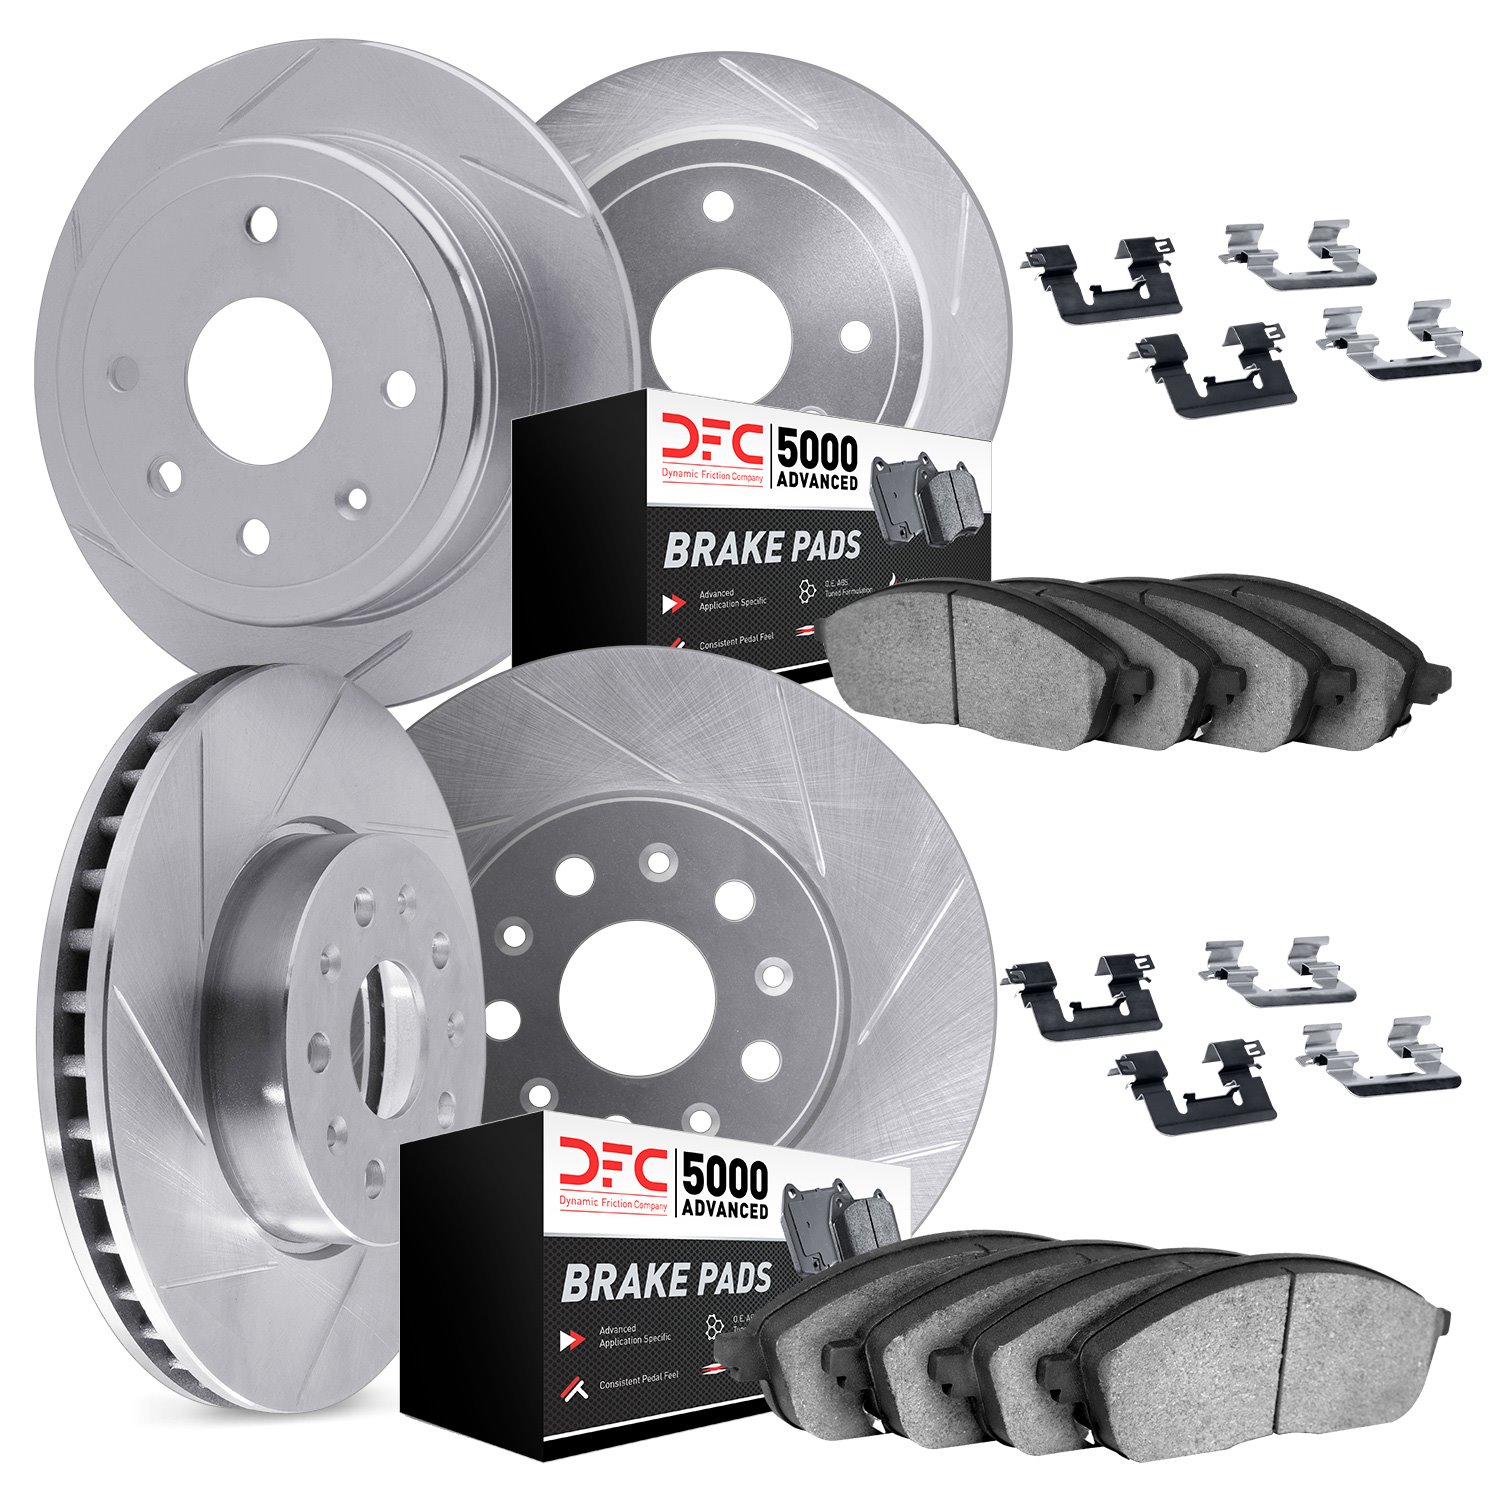 5514-42016 Slotted Brake Rotors w/5000 Advanced Brake Pads Kit & Hardware [Silver], Fits Select Mopar, Position: Front and Rear